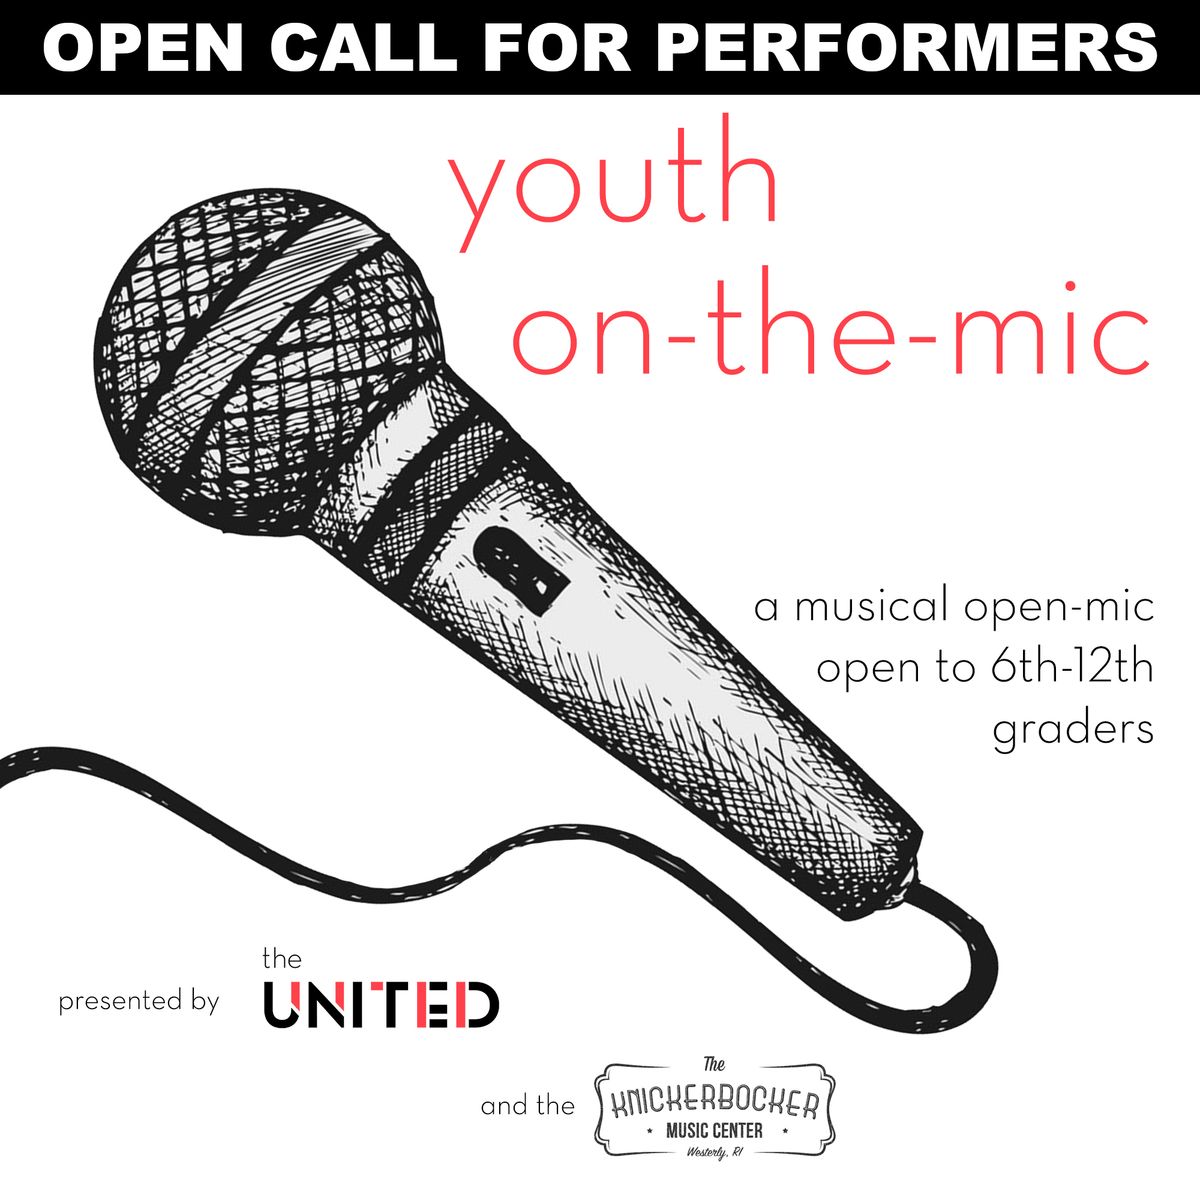 YOUTH ON-THE-MIC